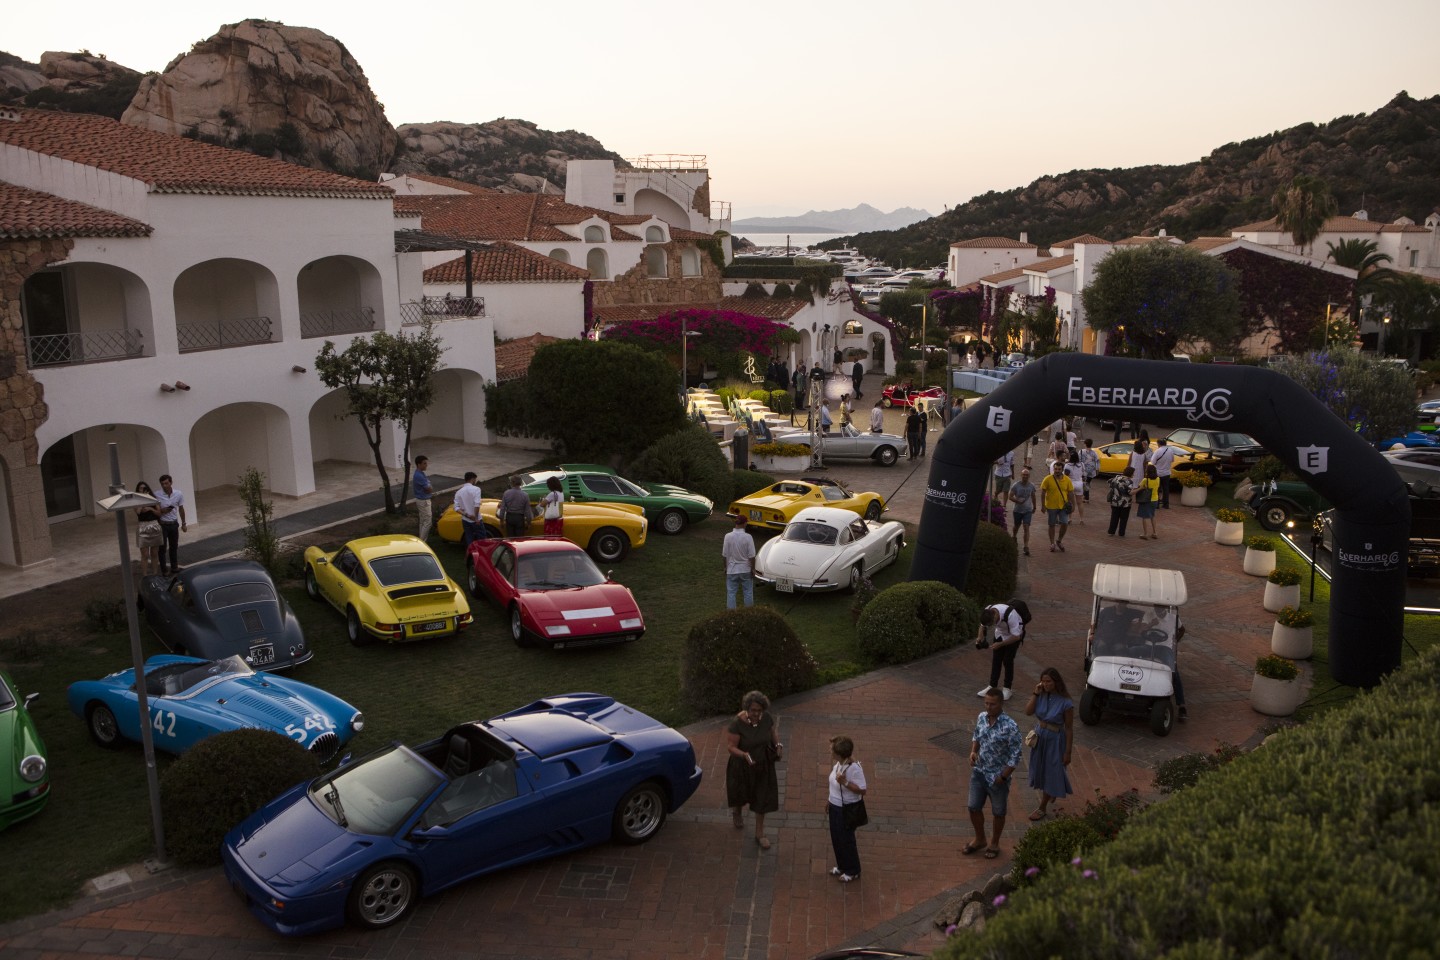 The Poltu Quatu Classic Concours d’Elegance was held 10, 11 and 12 July 2020 with an event slogan of "make life dolce again."